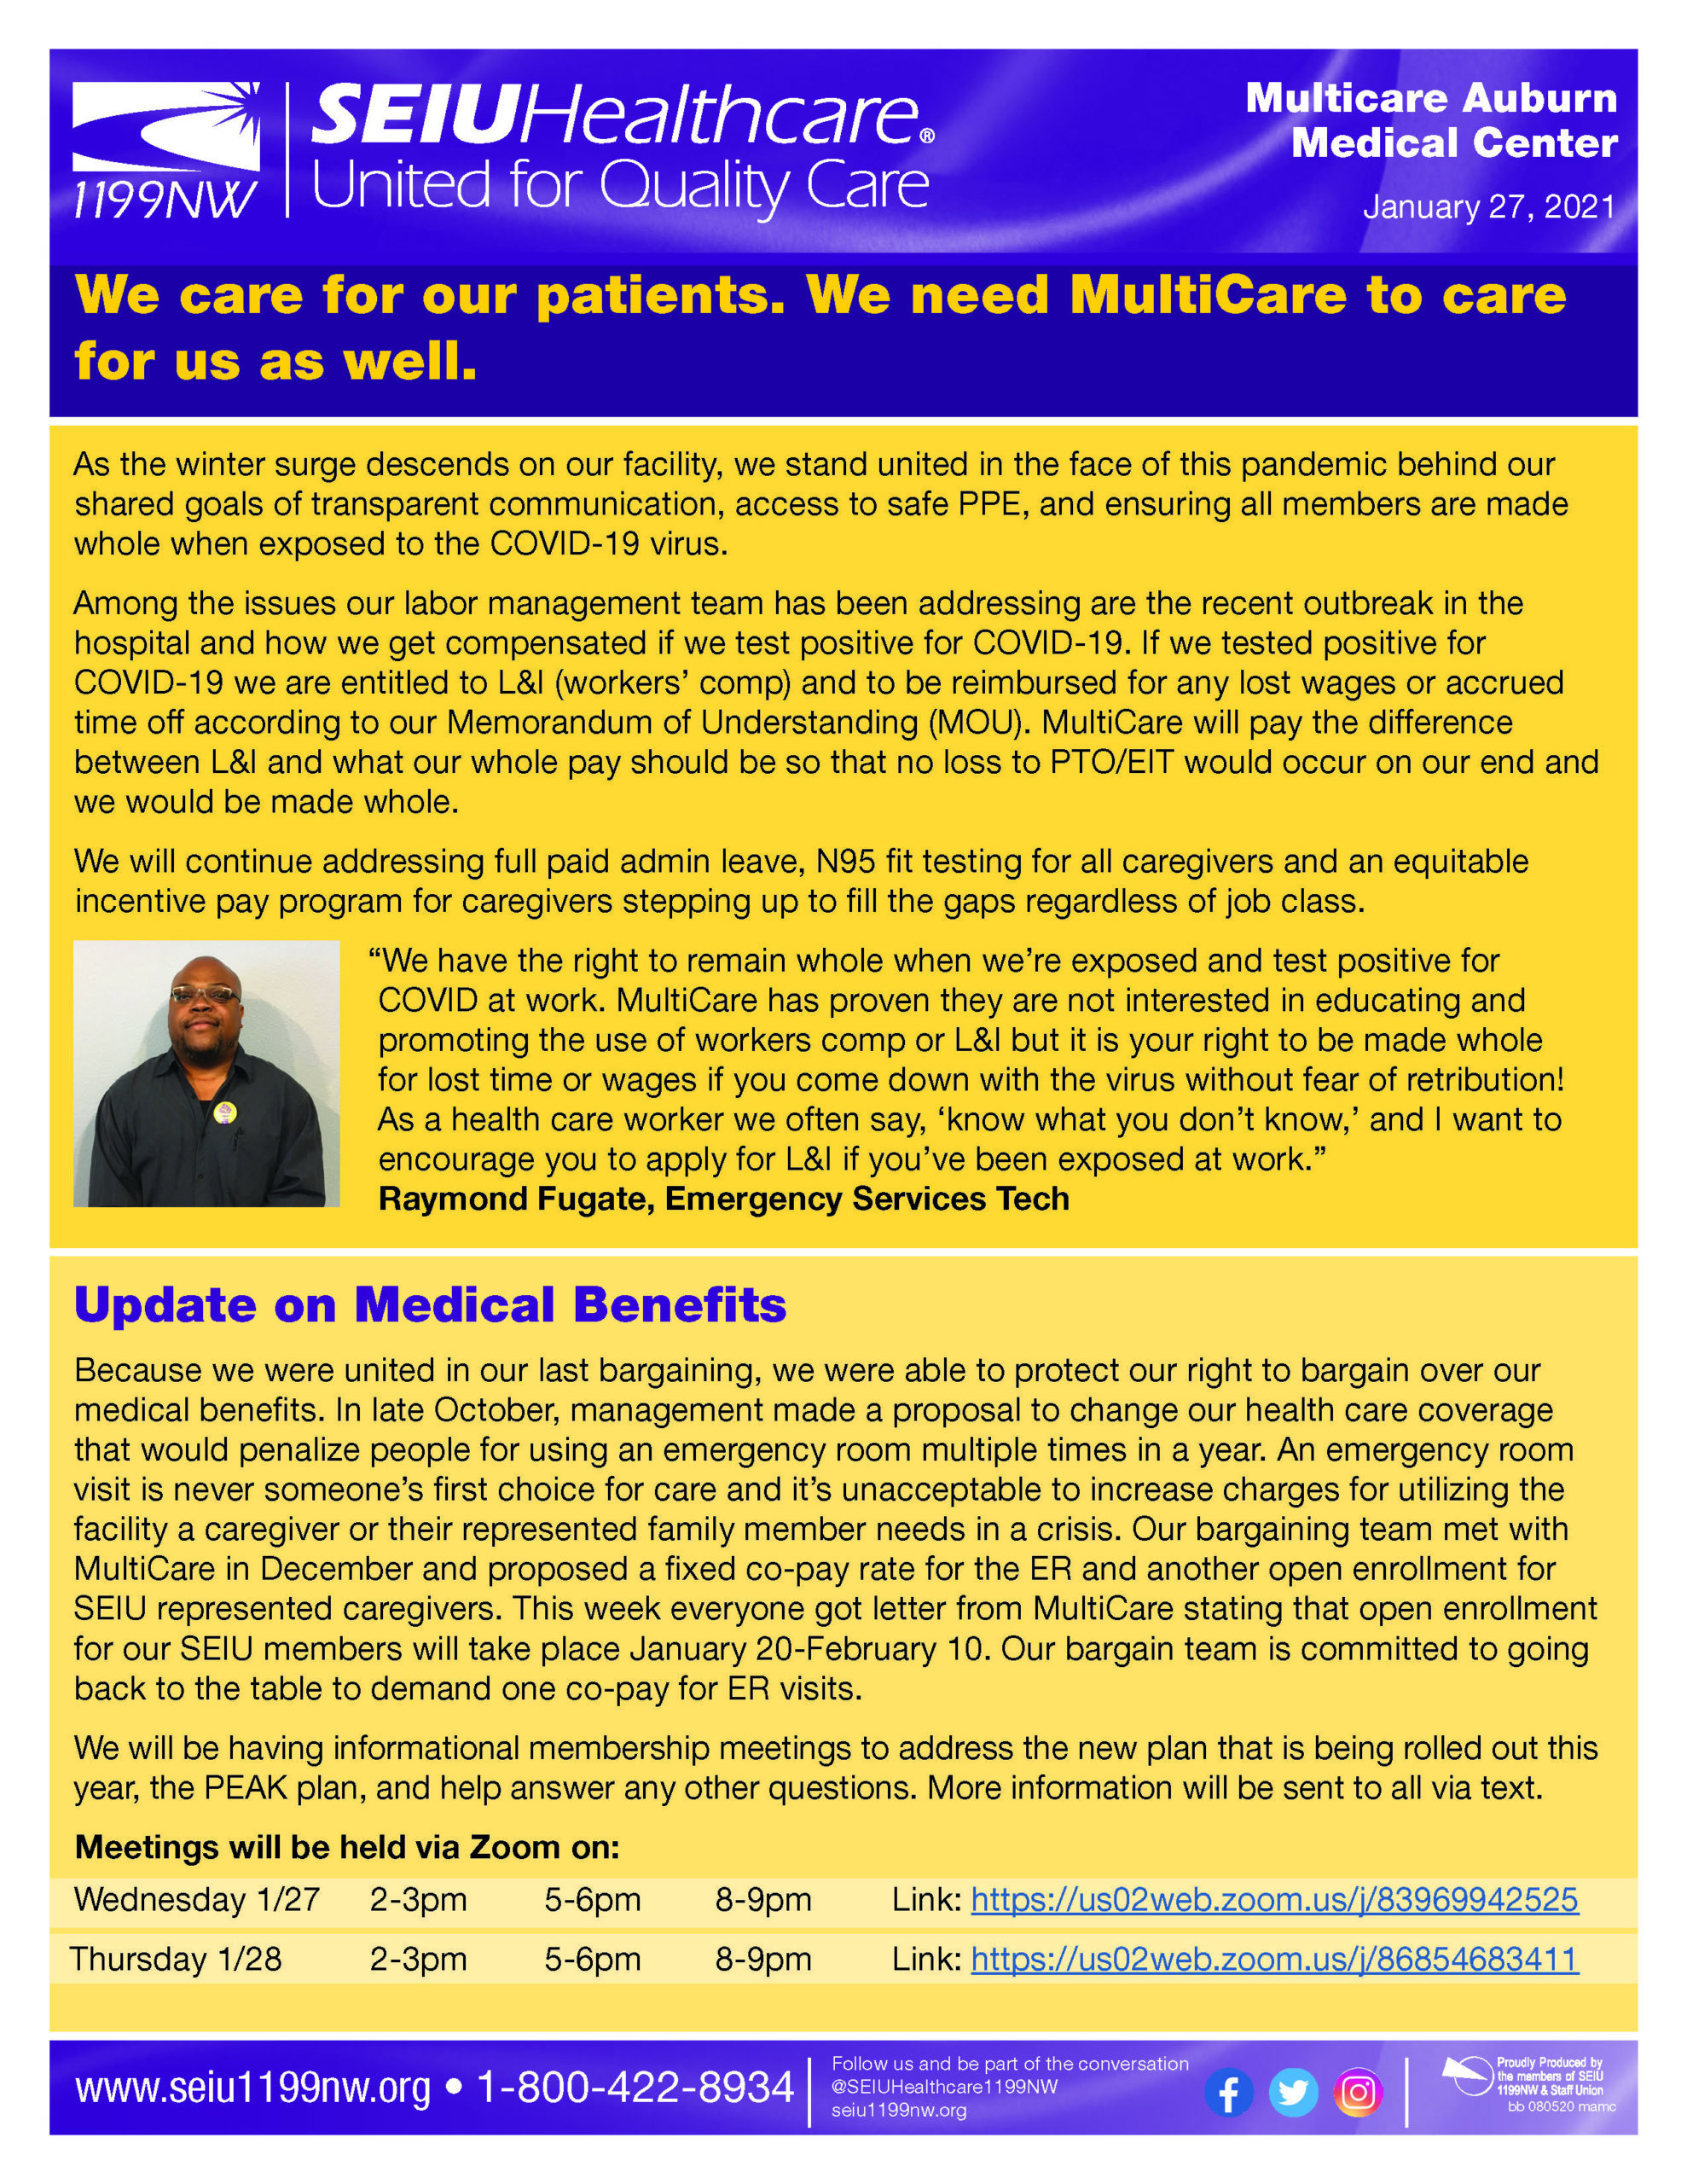 We care for our patients. We need MultiCare to care for us as well.